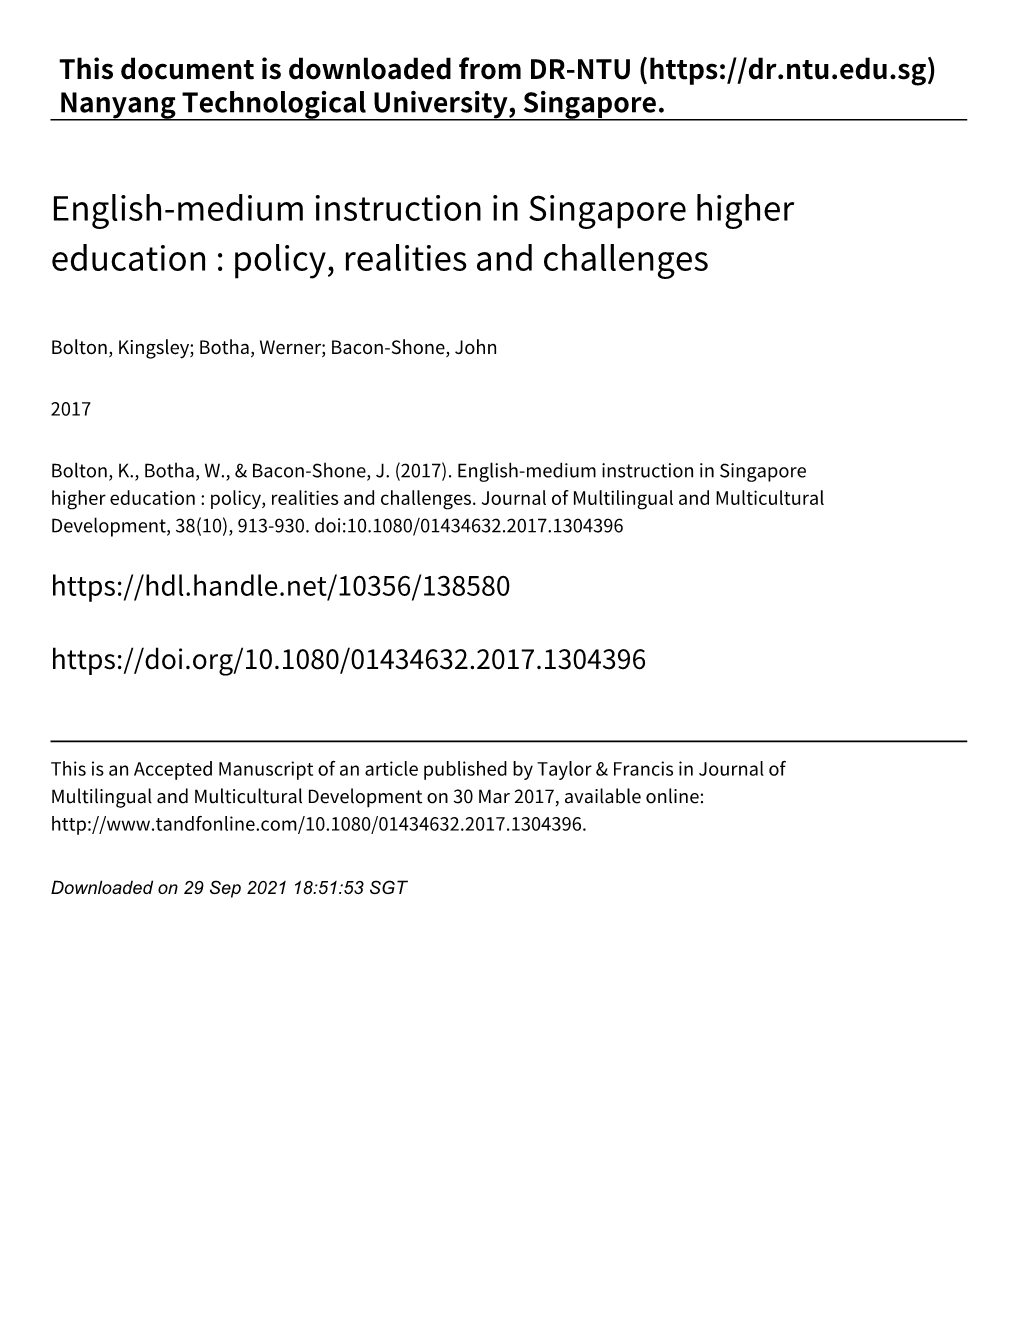 English‑Medium Instruction in Singapore Higher Education : Policy, Realities and Challenges